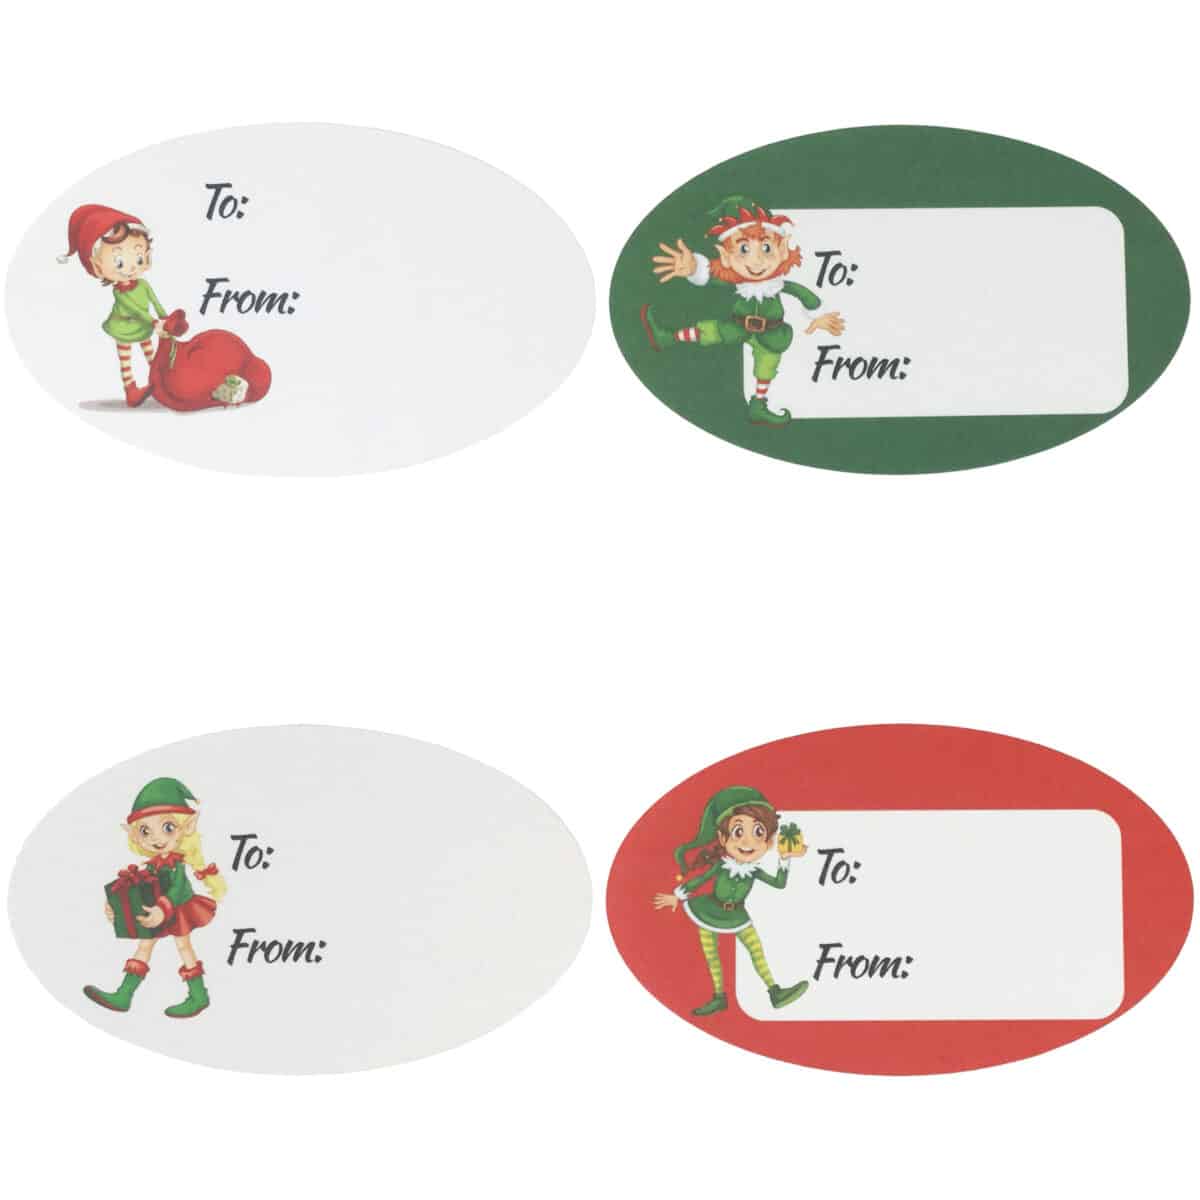 Elf Presents Gifts Tags Christmas Holiday To: From: Labels | 1.5 x 2.5  inch - 100 Pack